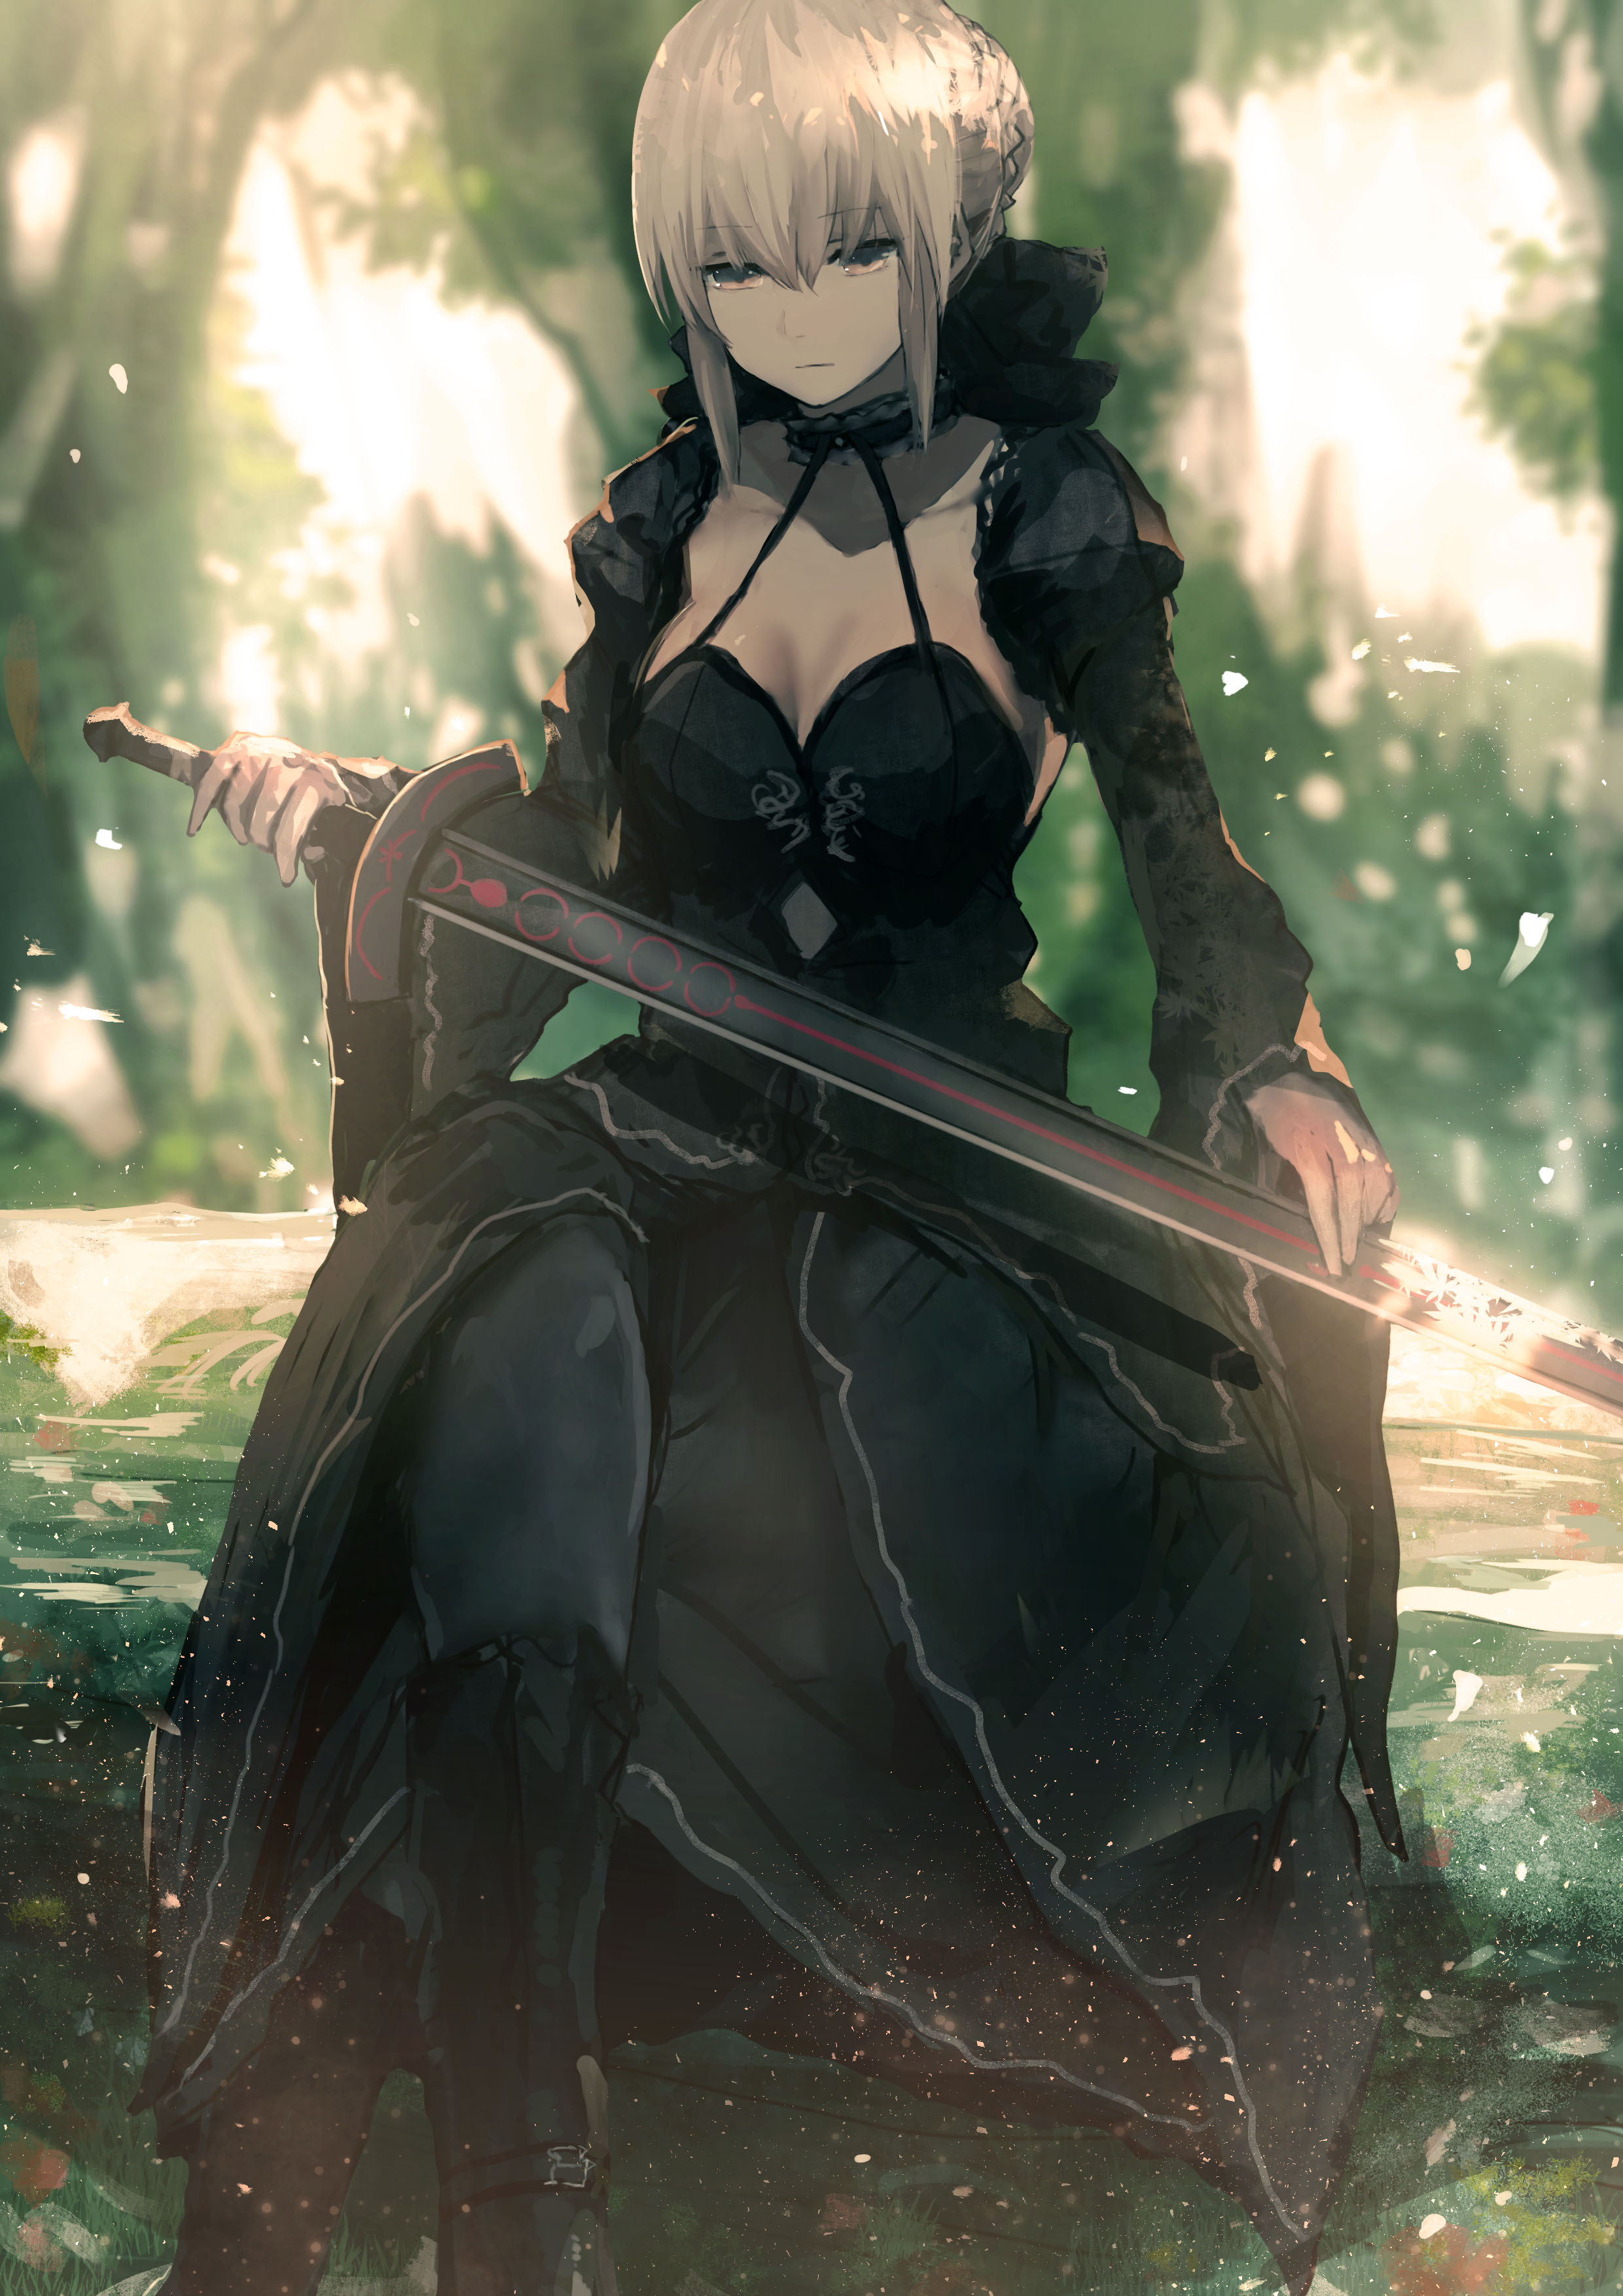 Anime 2480x3508 Fate series Fate/Stay Night fate/stay night: heaven's feel anime girls black dress cleavage Saber Alter digital art pantyhose small boobs Fate/Grand Order women with swords yellow eyes 2D thigh high boots forest Excalibur no bra fan art blonde Artoria Pendragon